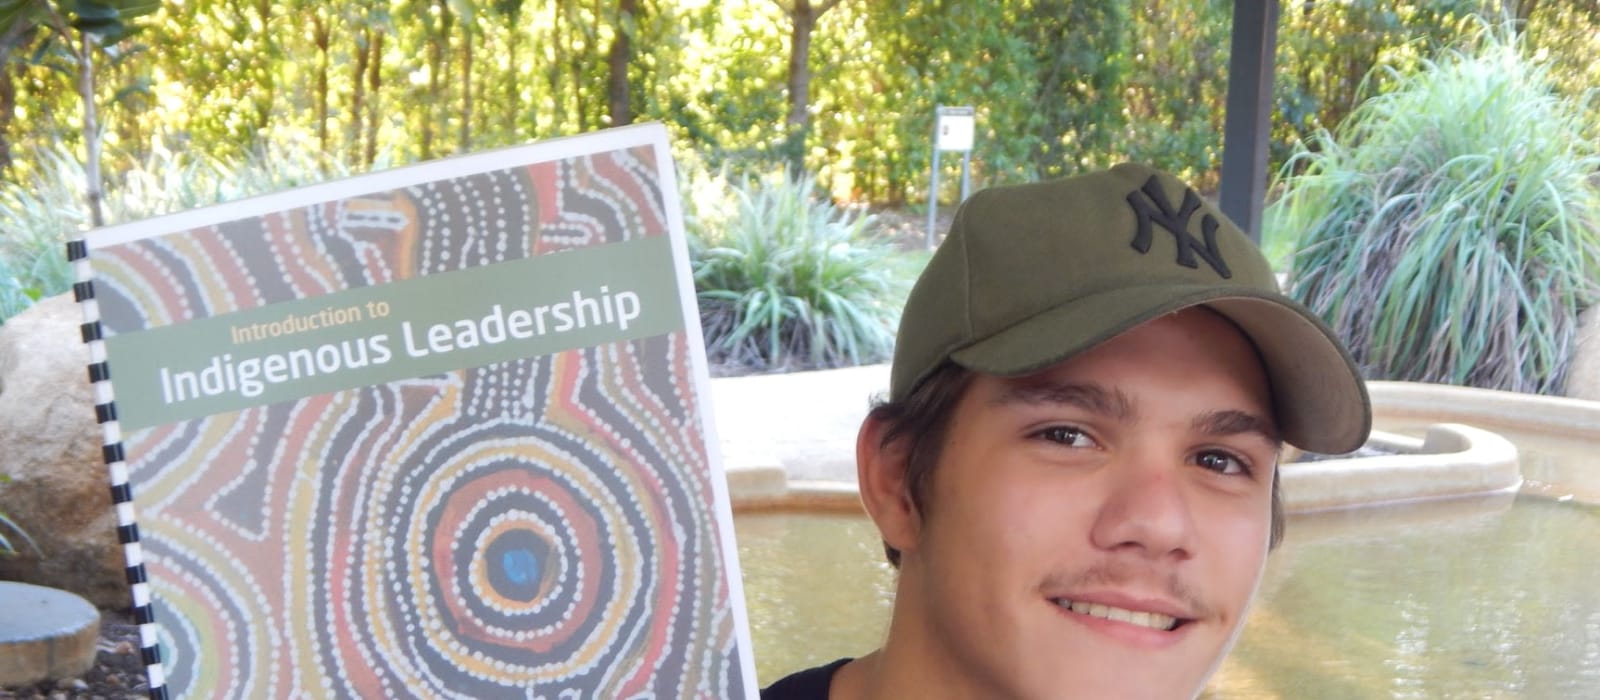 Introduction to Indigenous Leadership